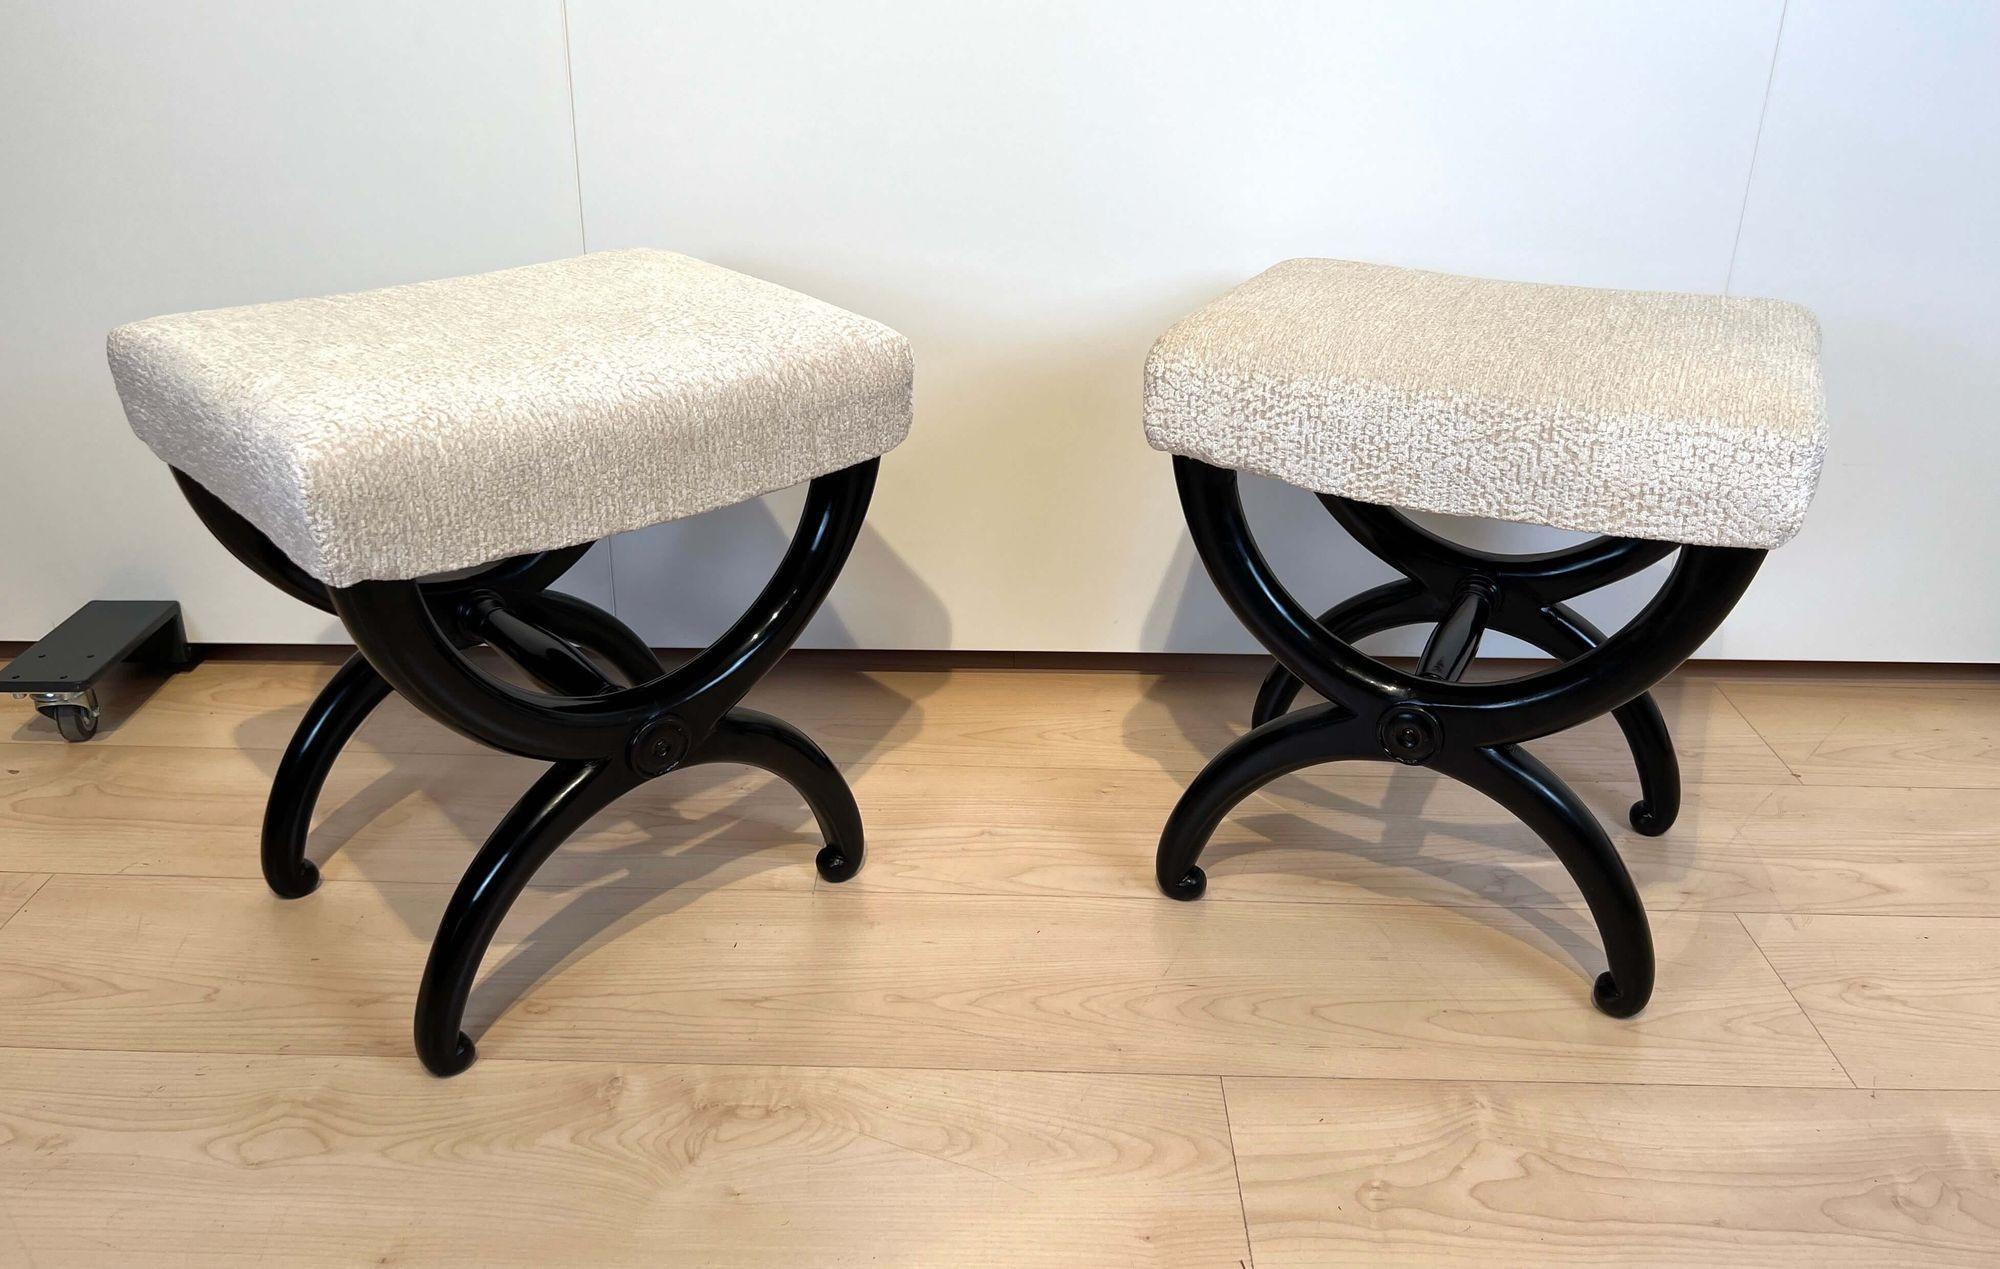 A beautiful pair of petite stools from the french restoration / Biedermeier period.

Solid beech wood, ebonized and polished. Newly upholstered and covered with cream-white structured velvet fabric and double keder. Also for sale